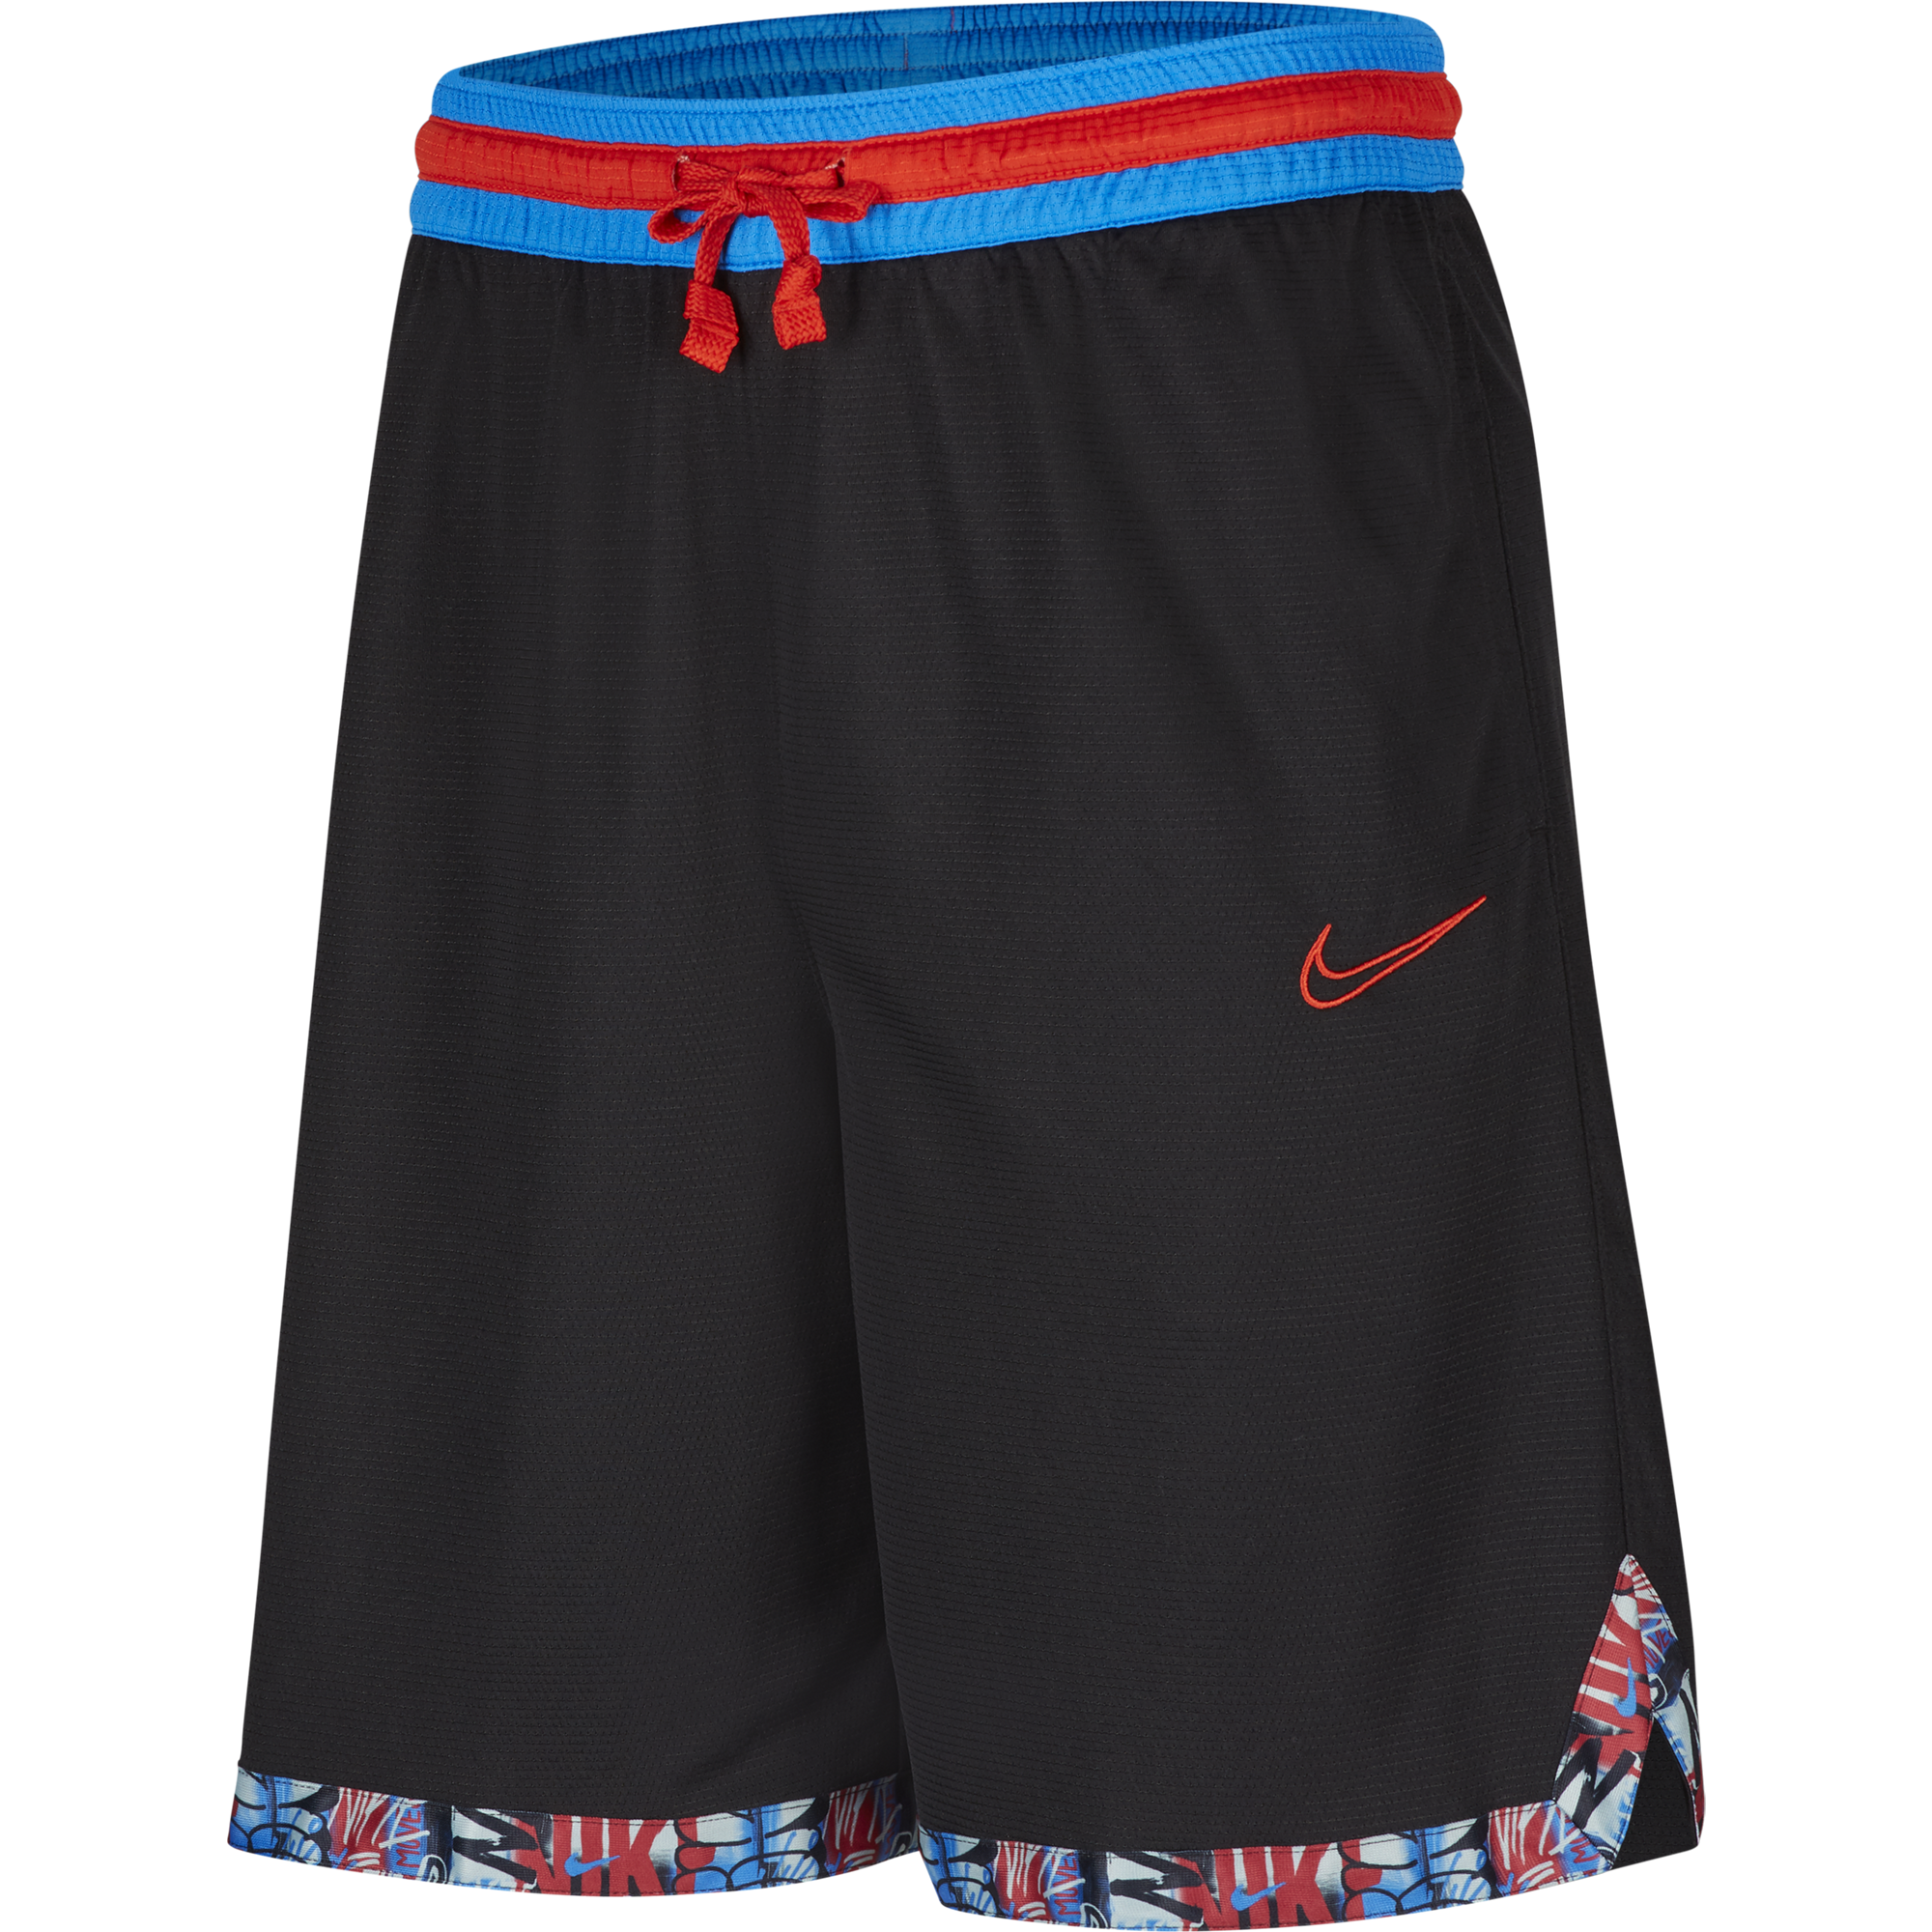 NIKE DRI-FIT DNA BASKETBALL SHORTS BLACK CHILE RED